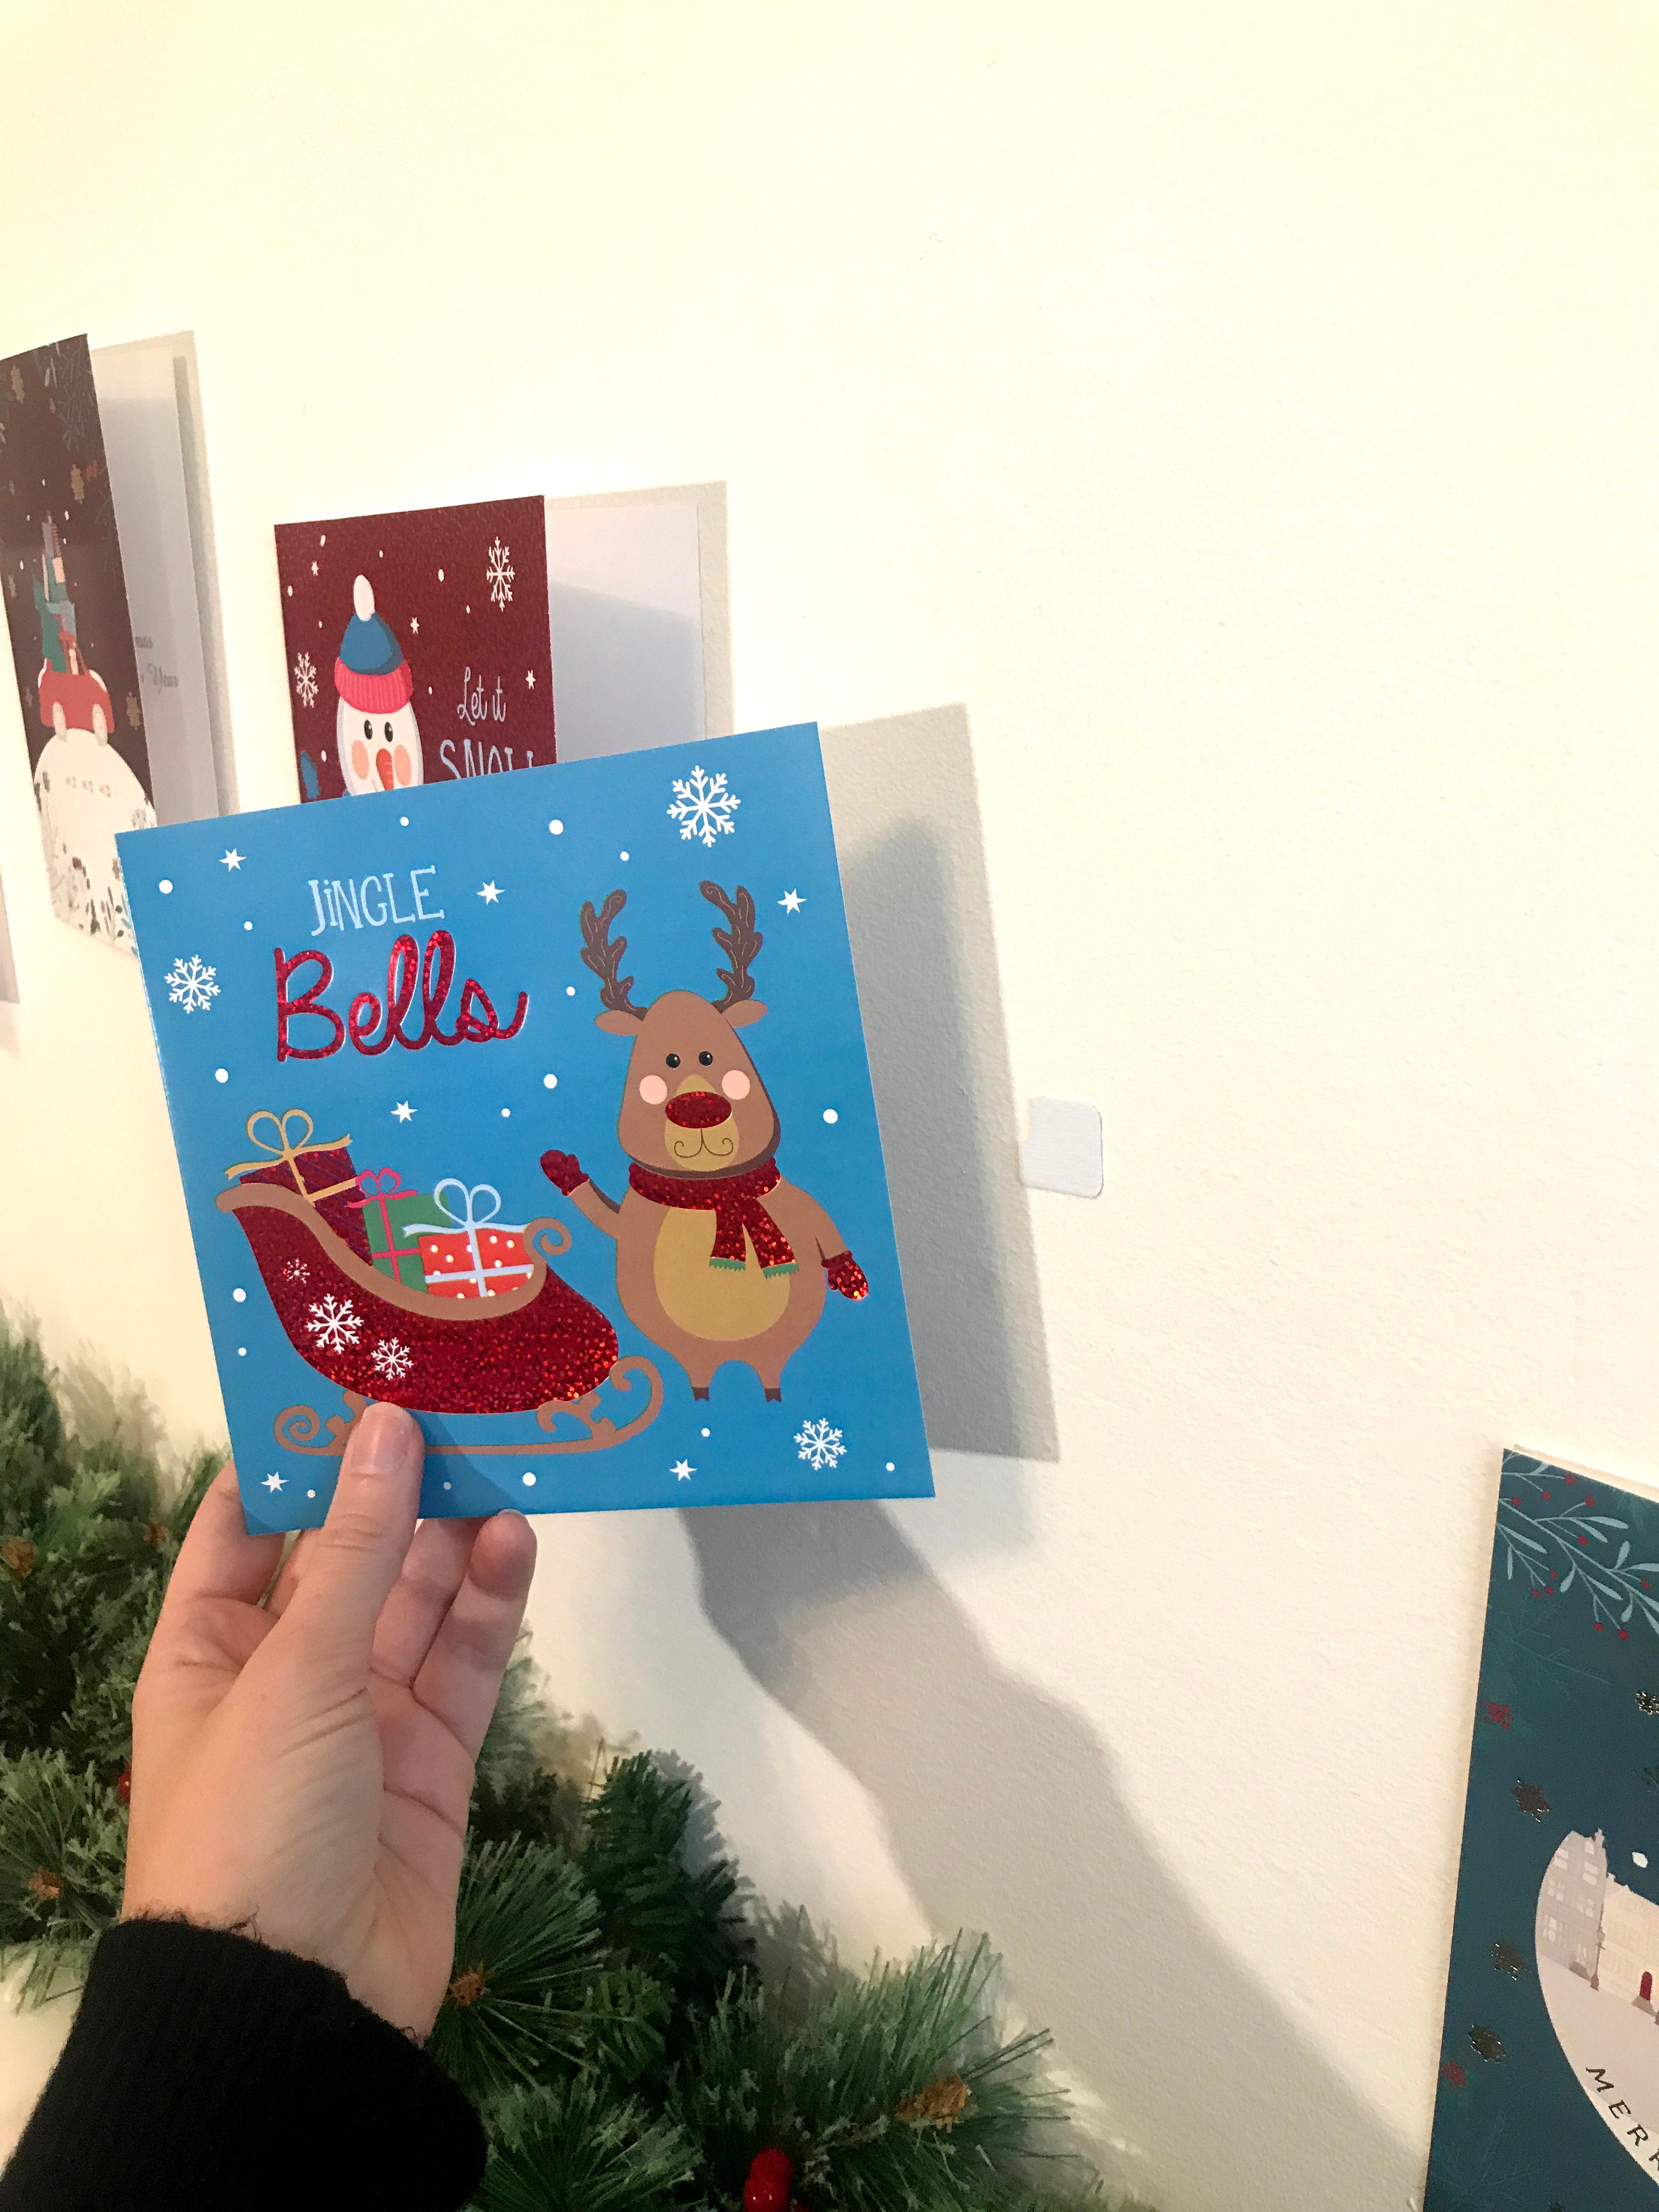 How to Display Christmas Cards Without Damaging the Walls